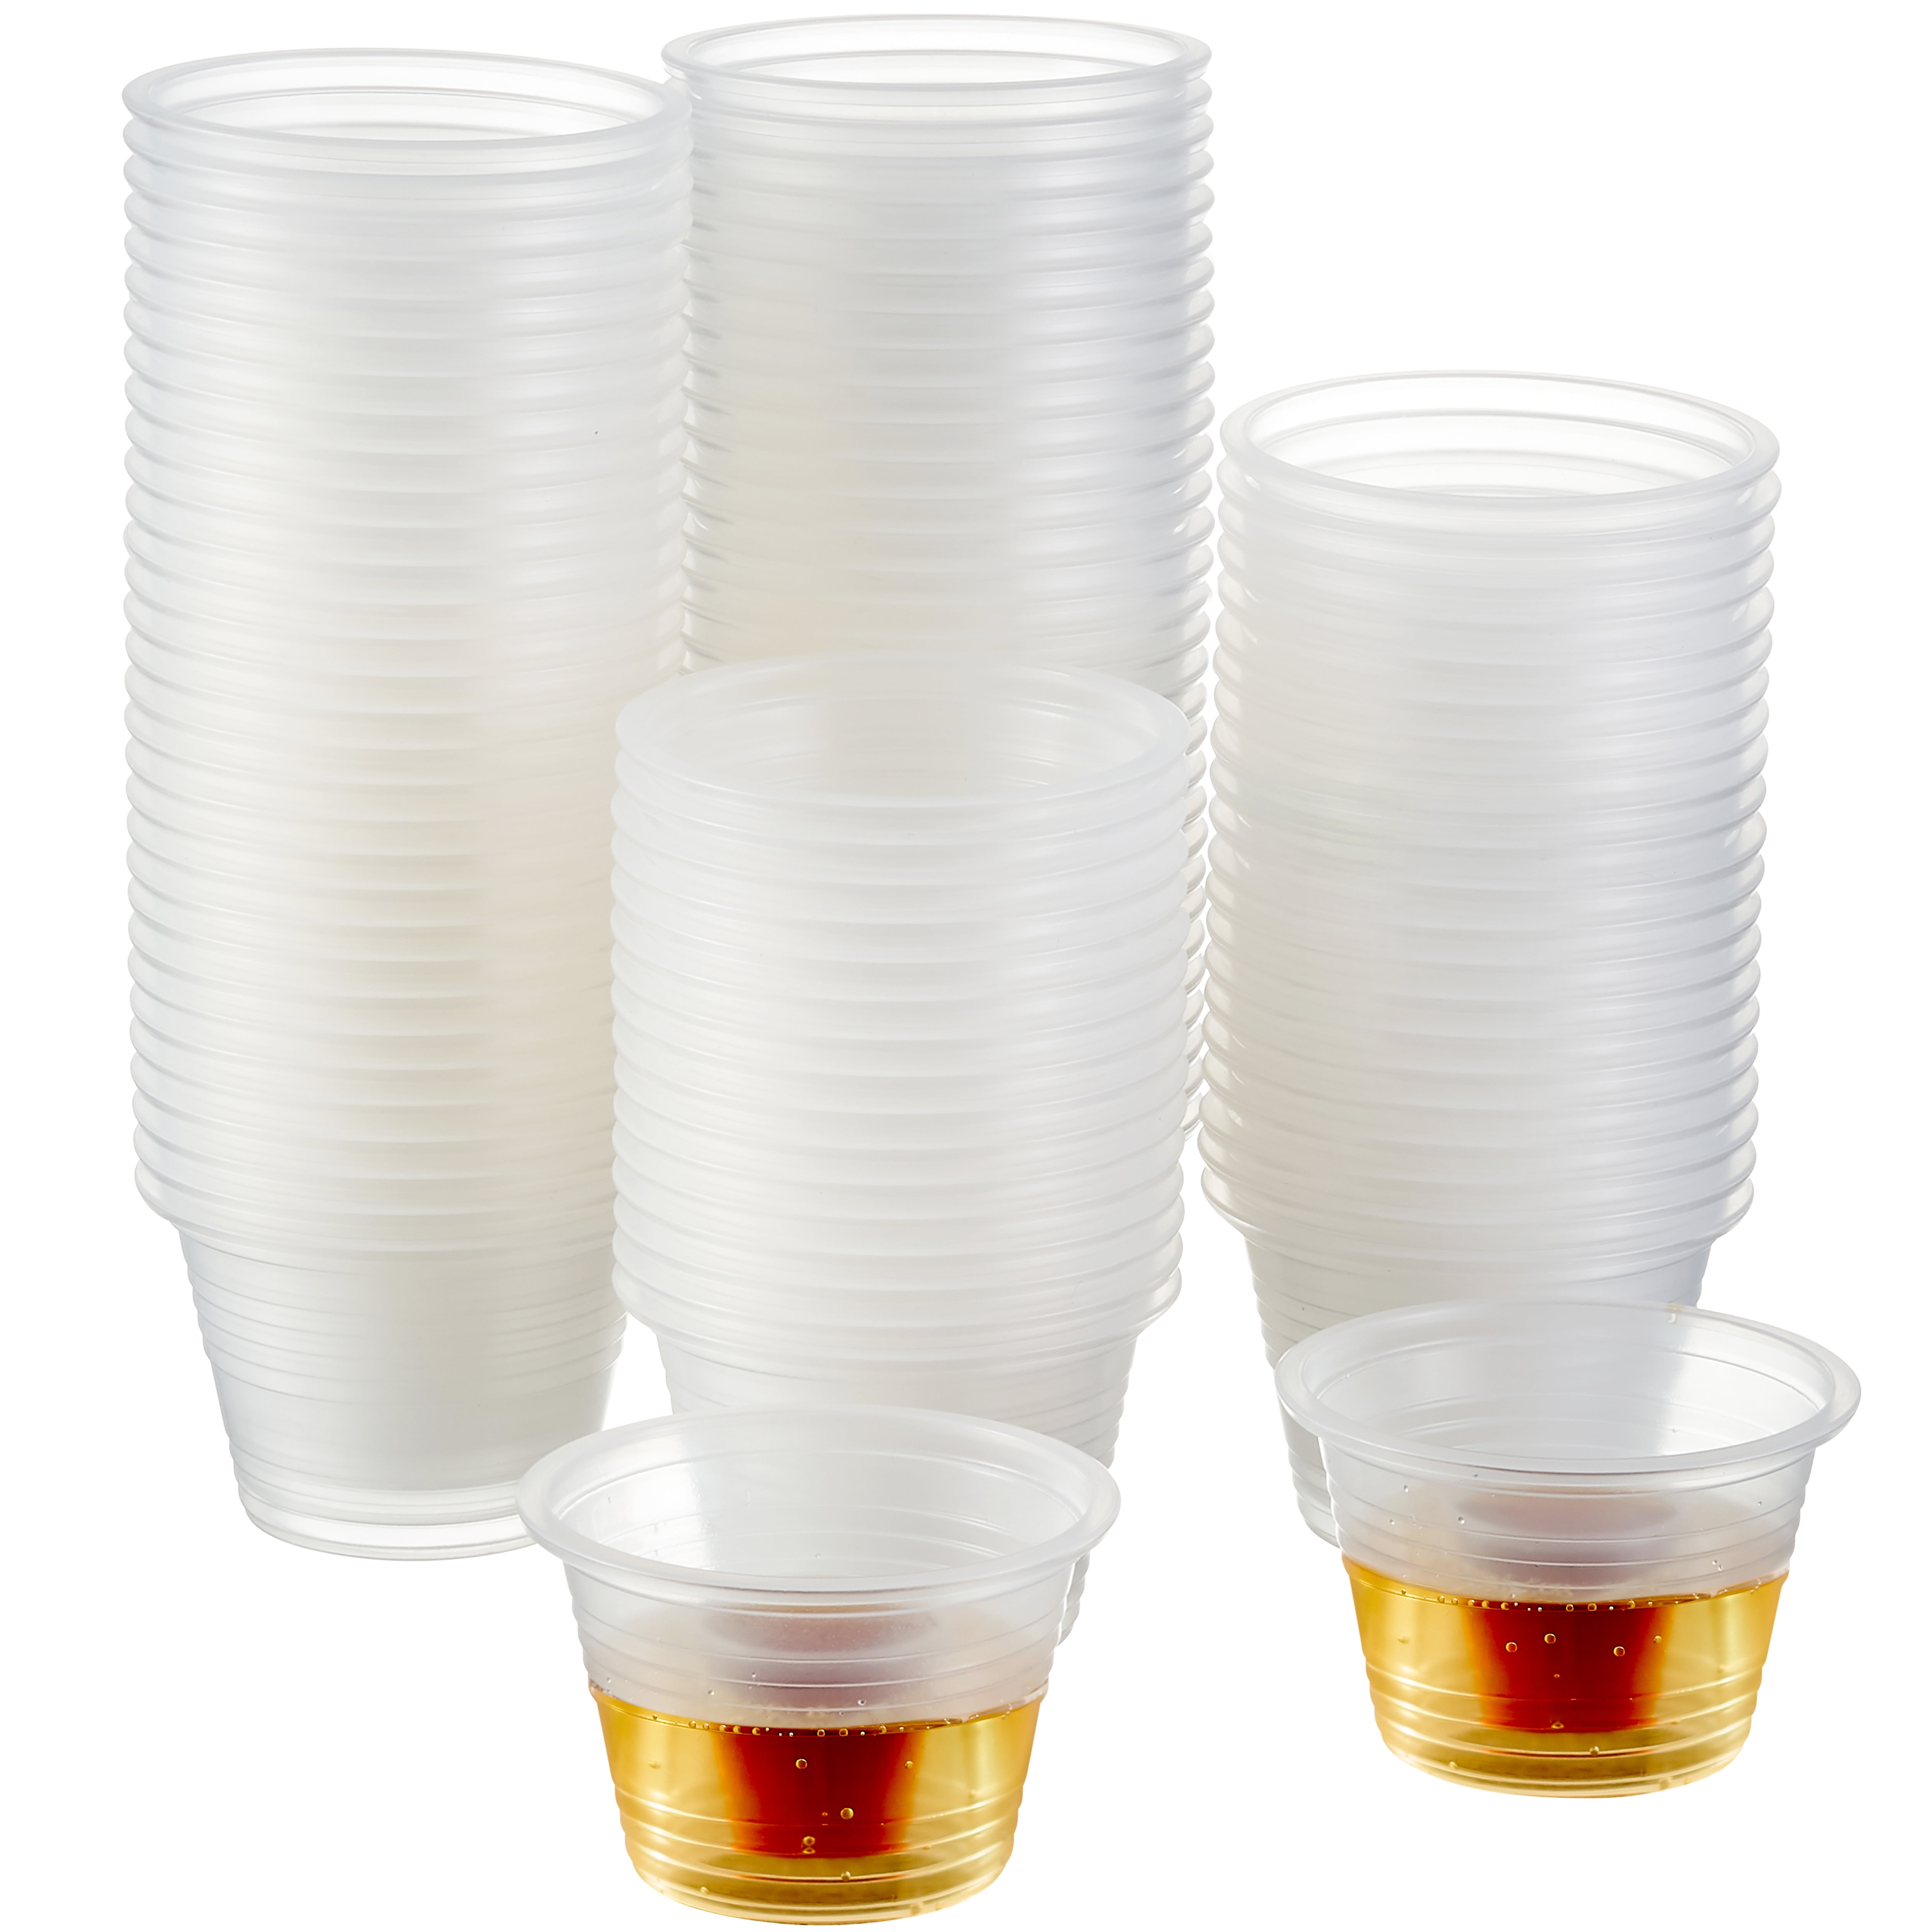 BYAWAY 0.8-Ounce Shot Glass,Medicine Cups Reusable Set of 4,Mini Clear  Glass Cups Small Glasses Mout…See more BYAWAY 0.8-Ounce Shot Glass,Medicine